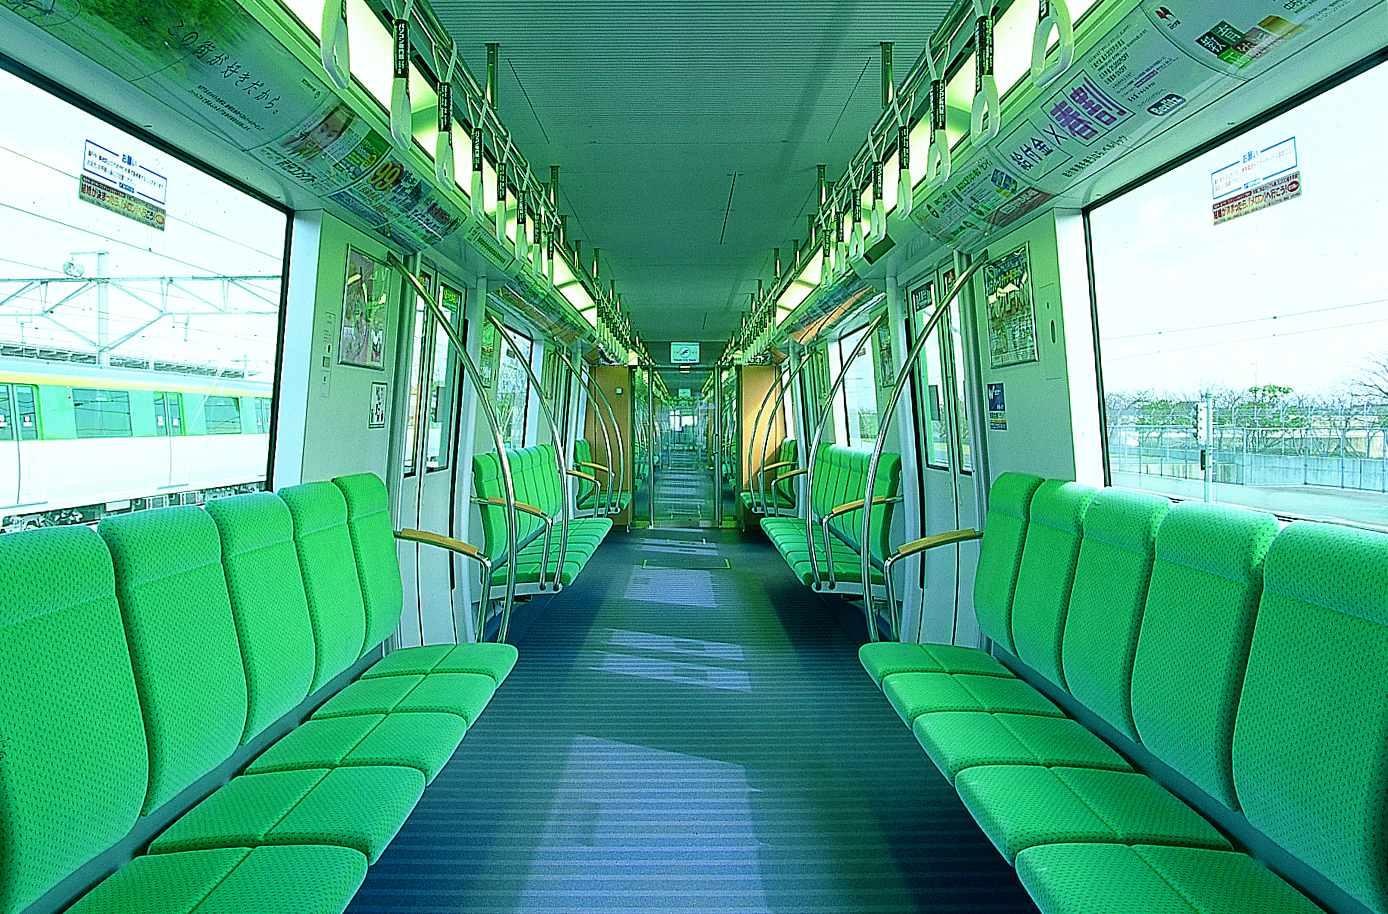 Interior of subway car with green seats along the wall and three doorways per side of car. 